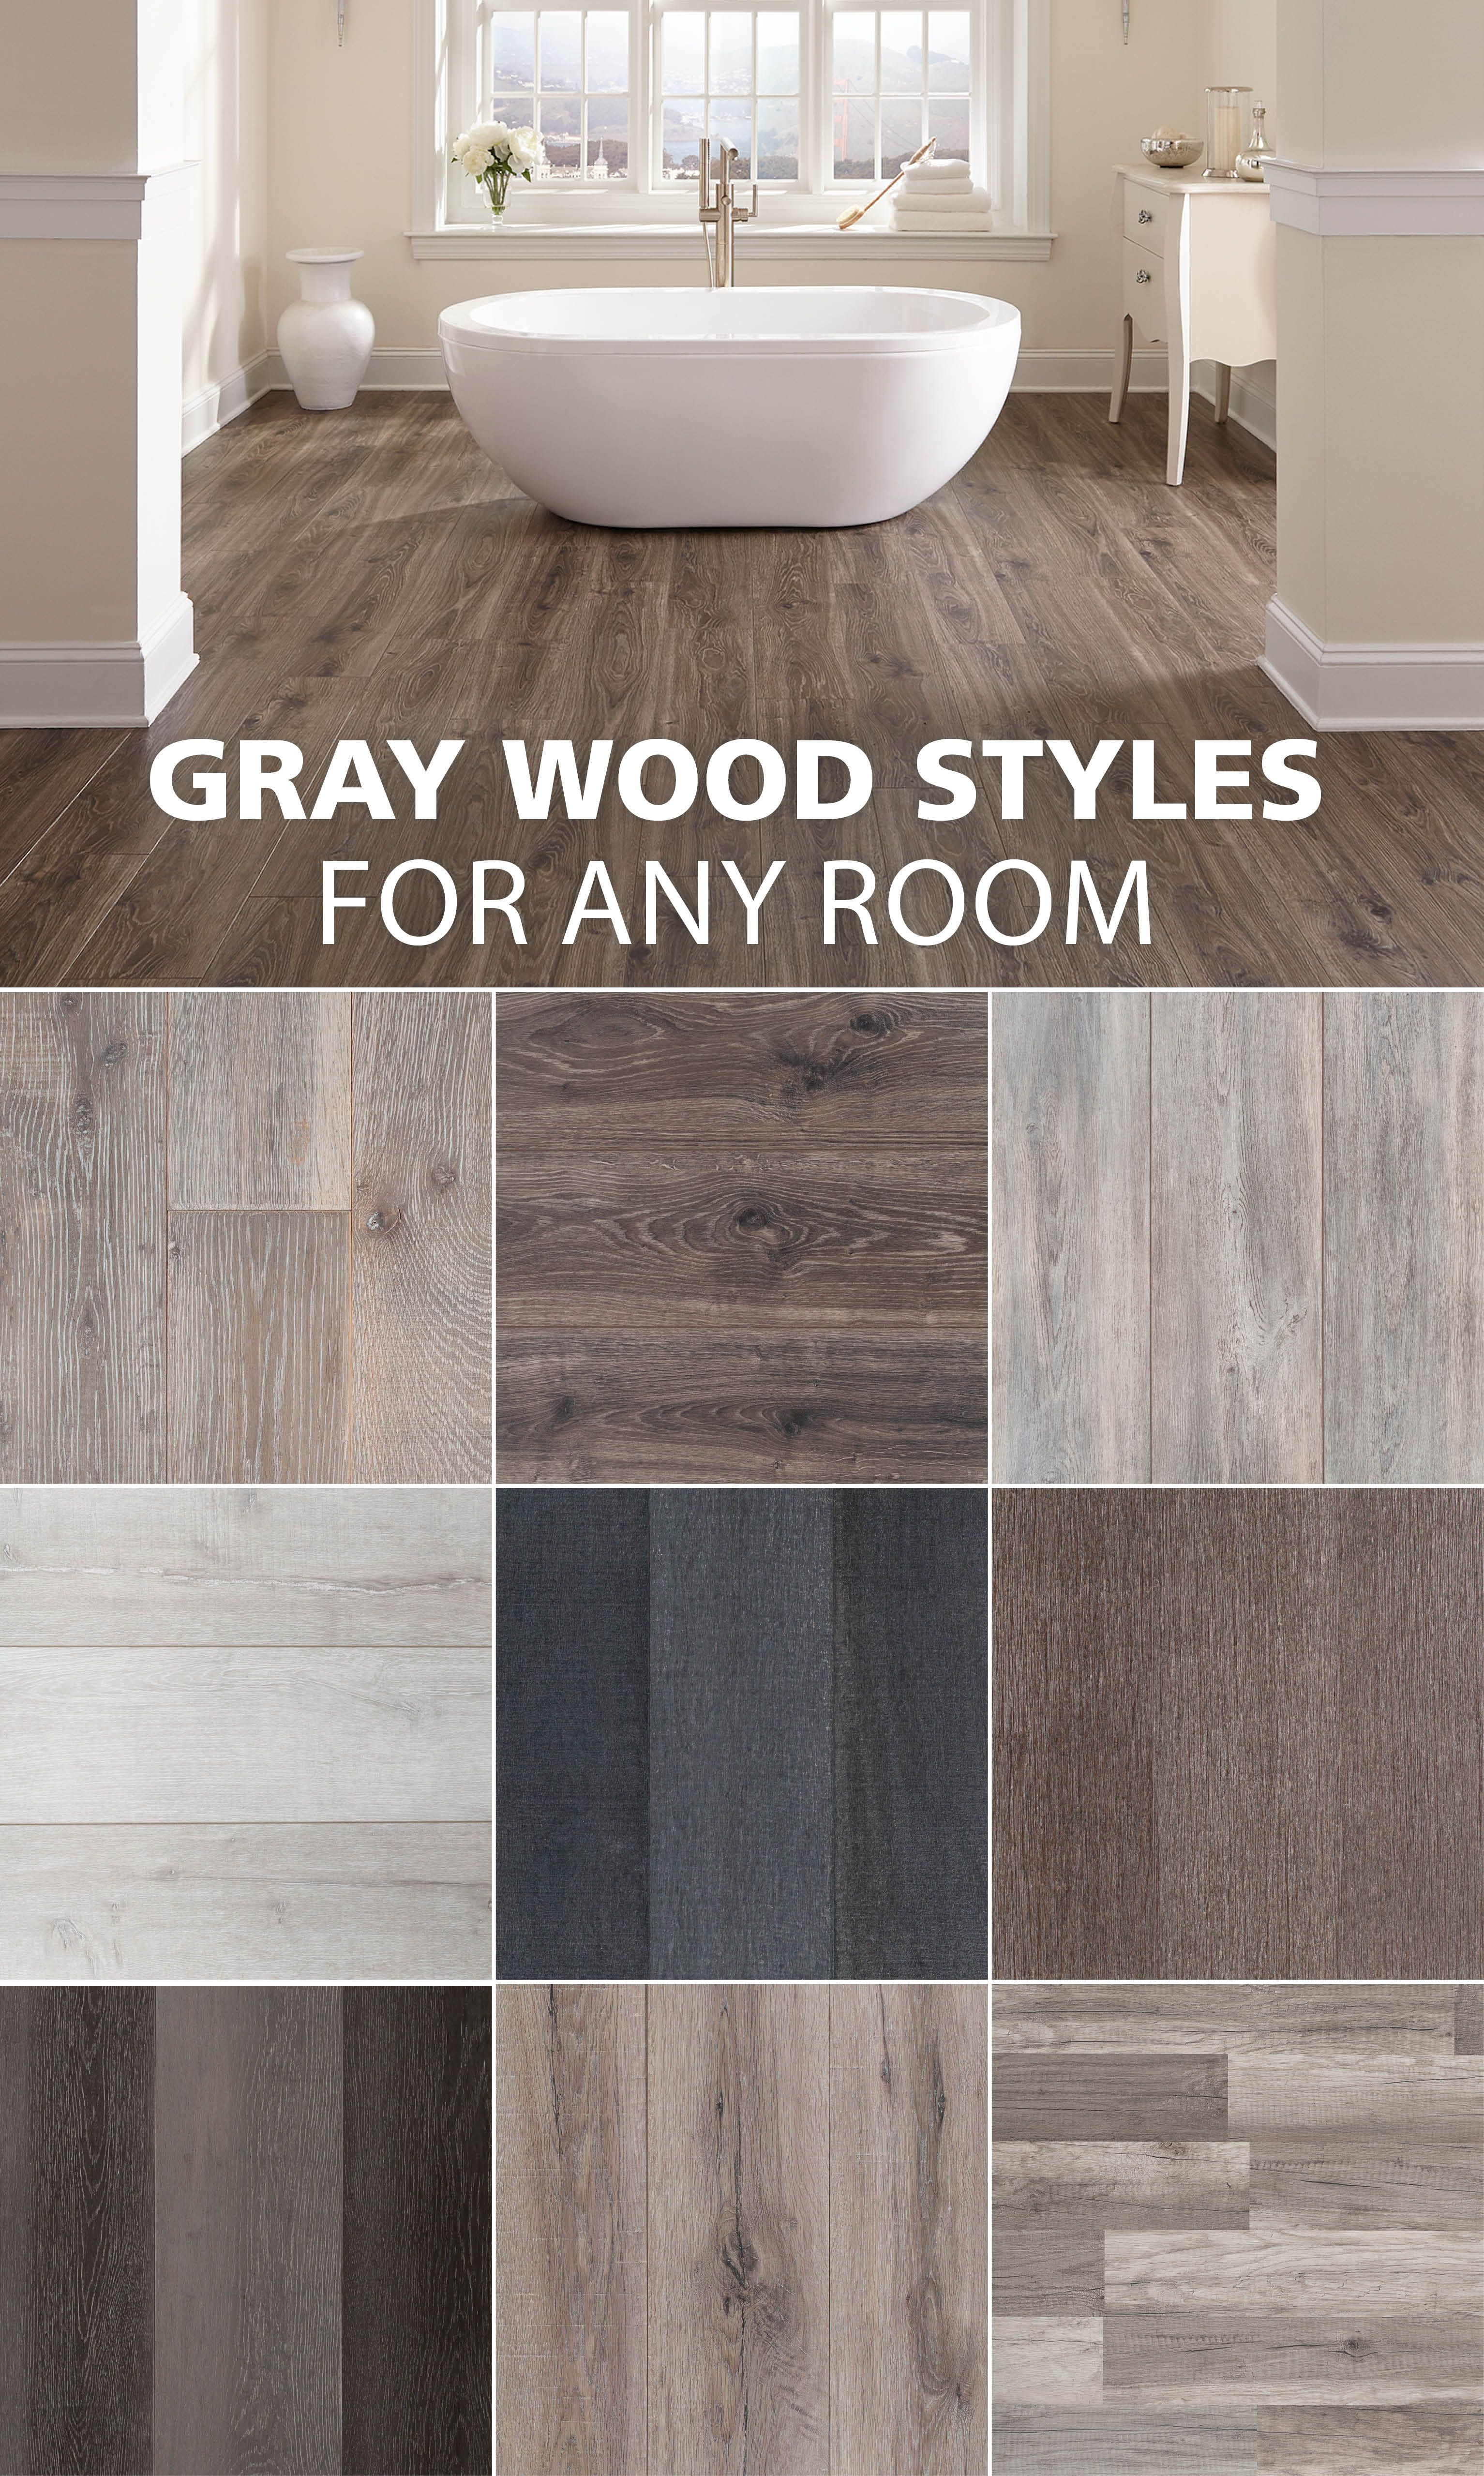 Hardwood Flooring Direct From Mill Of Here are some Of Our Favorite Gray Wood Look Styles Home Decor Intended for Here are some Of Our Favorite Gray Wood Look Styles Gray Hardwood Floors Light